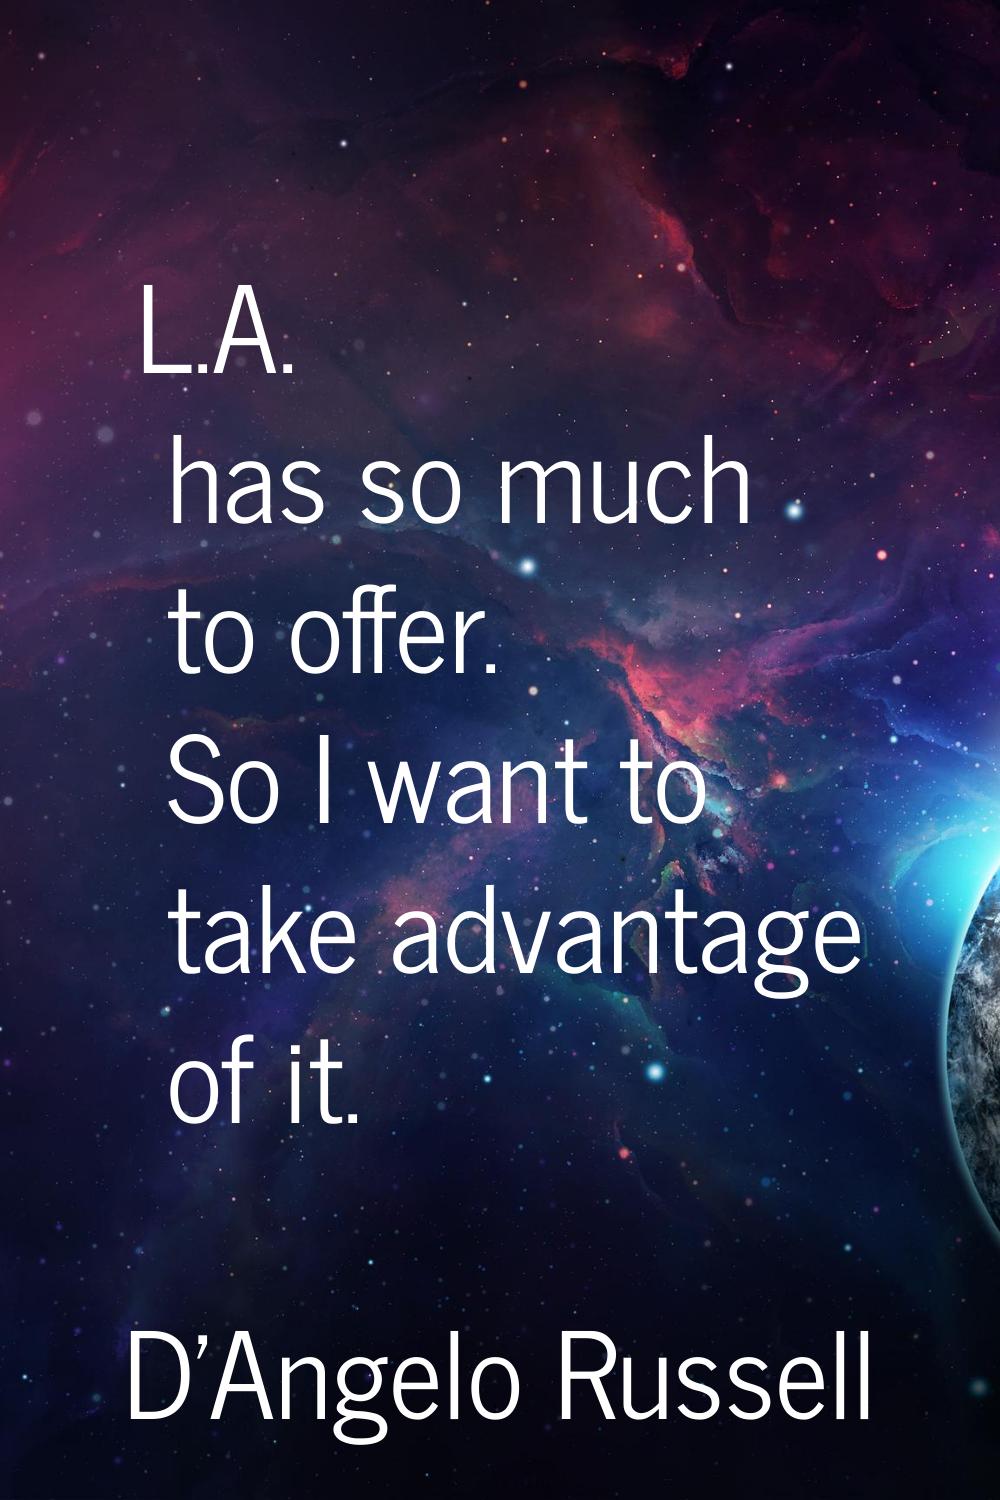 L.A. has so much to offer. So I want to take advantage of it.